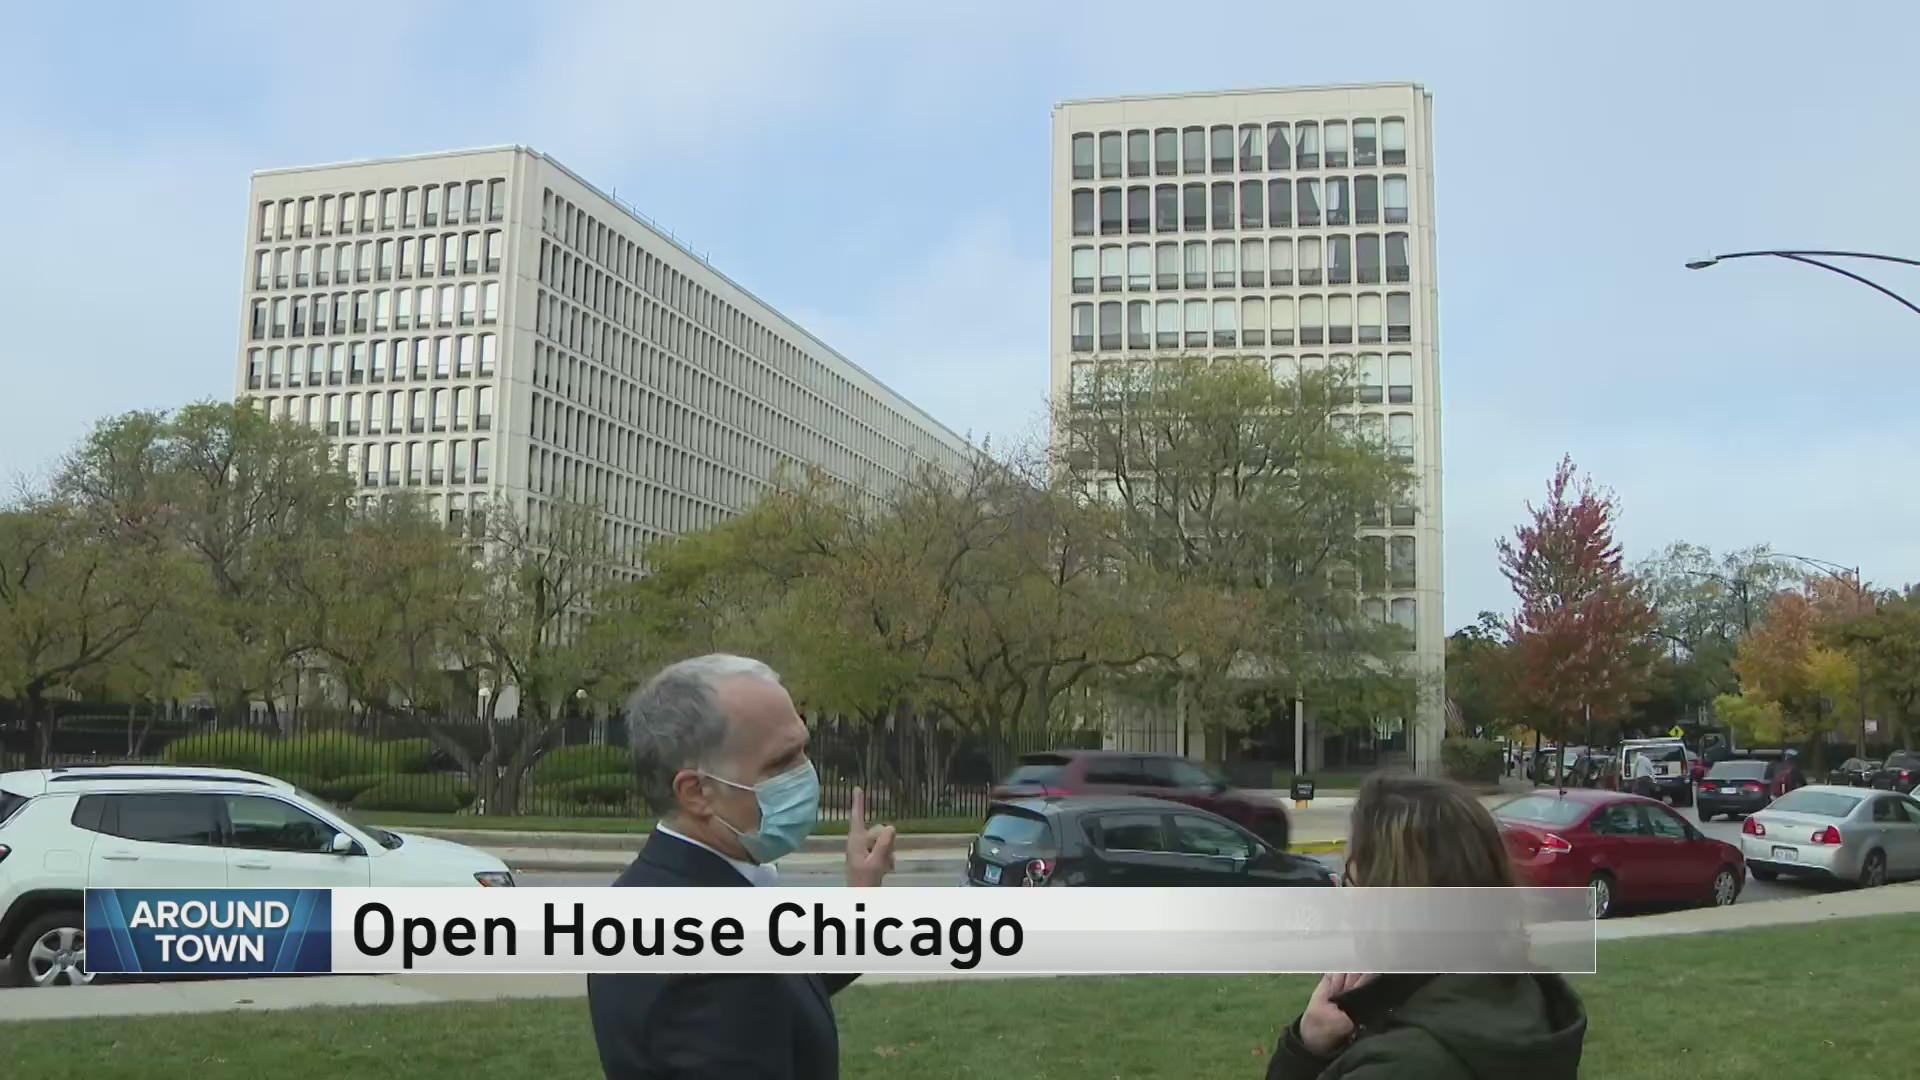 Around Town checks out Open House Chicago 2020